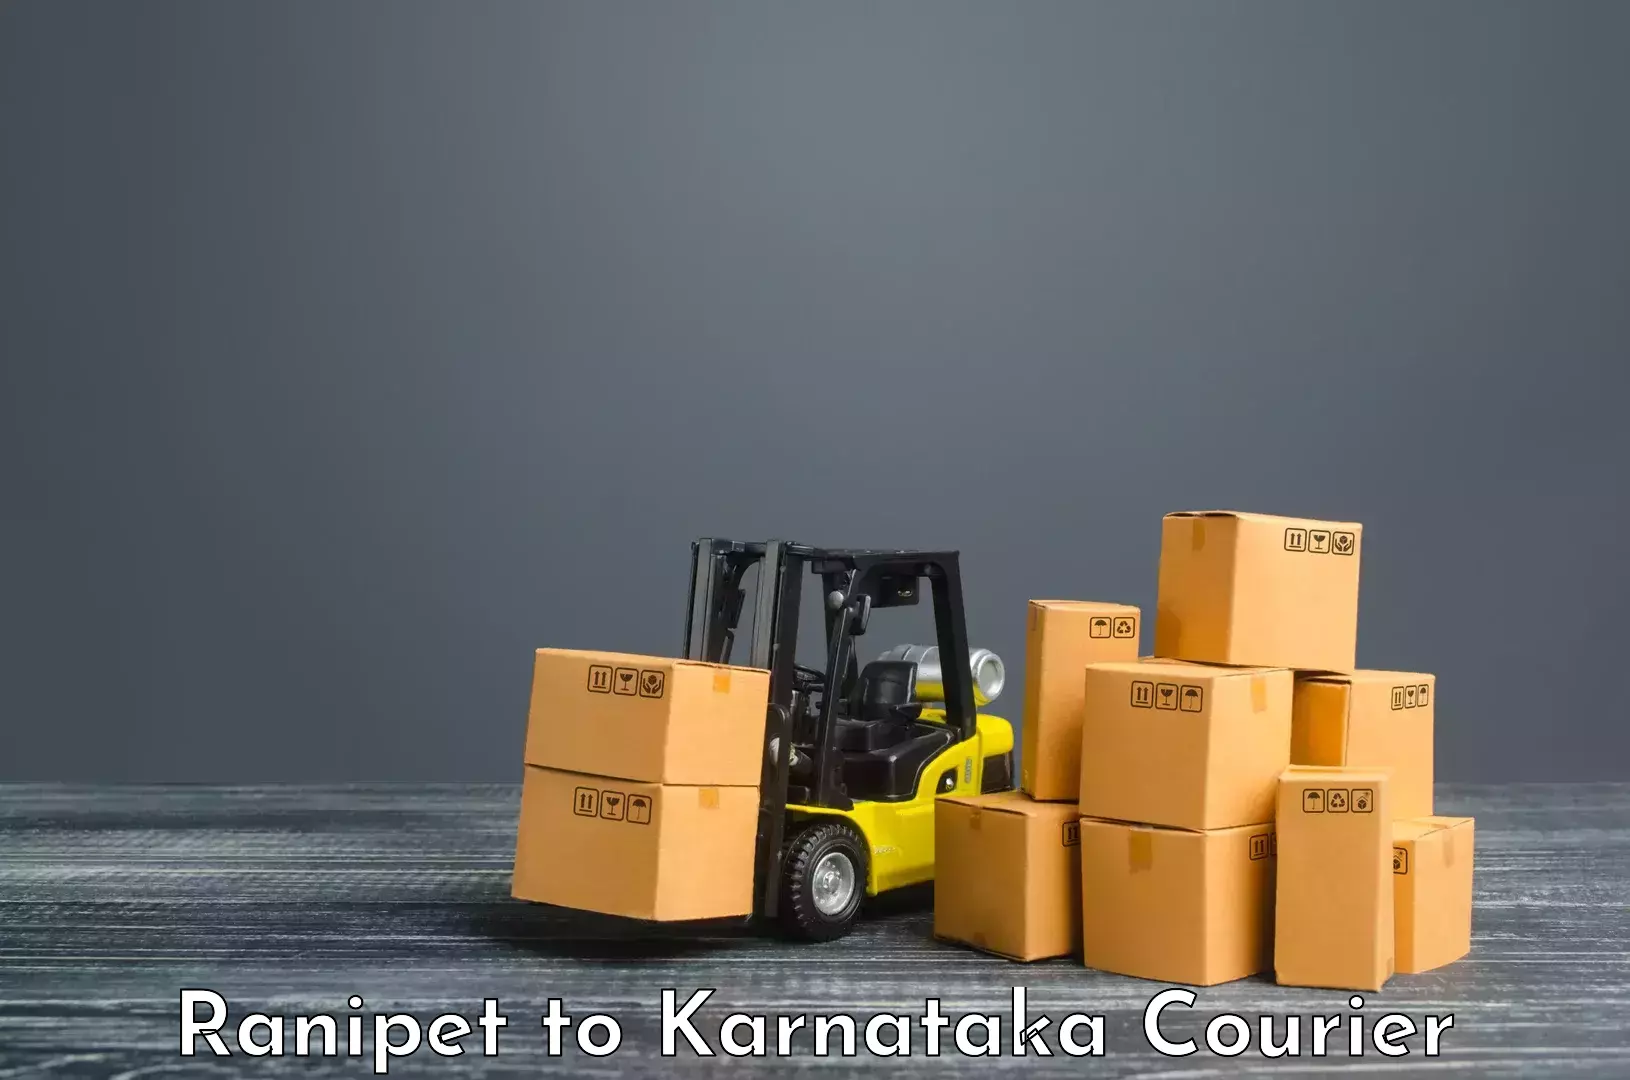 International parcel service Ranipet to Manipal Academy of Higher Education